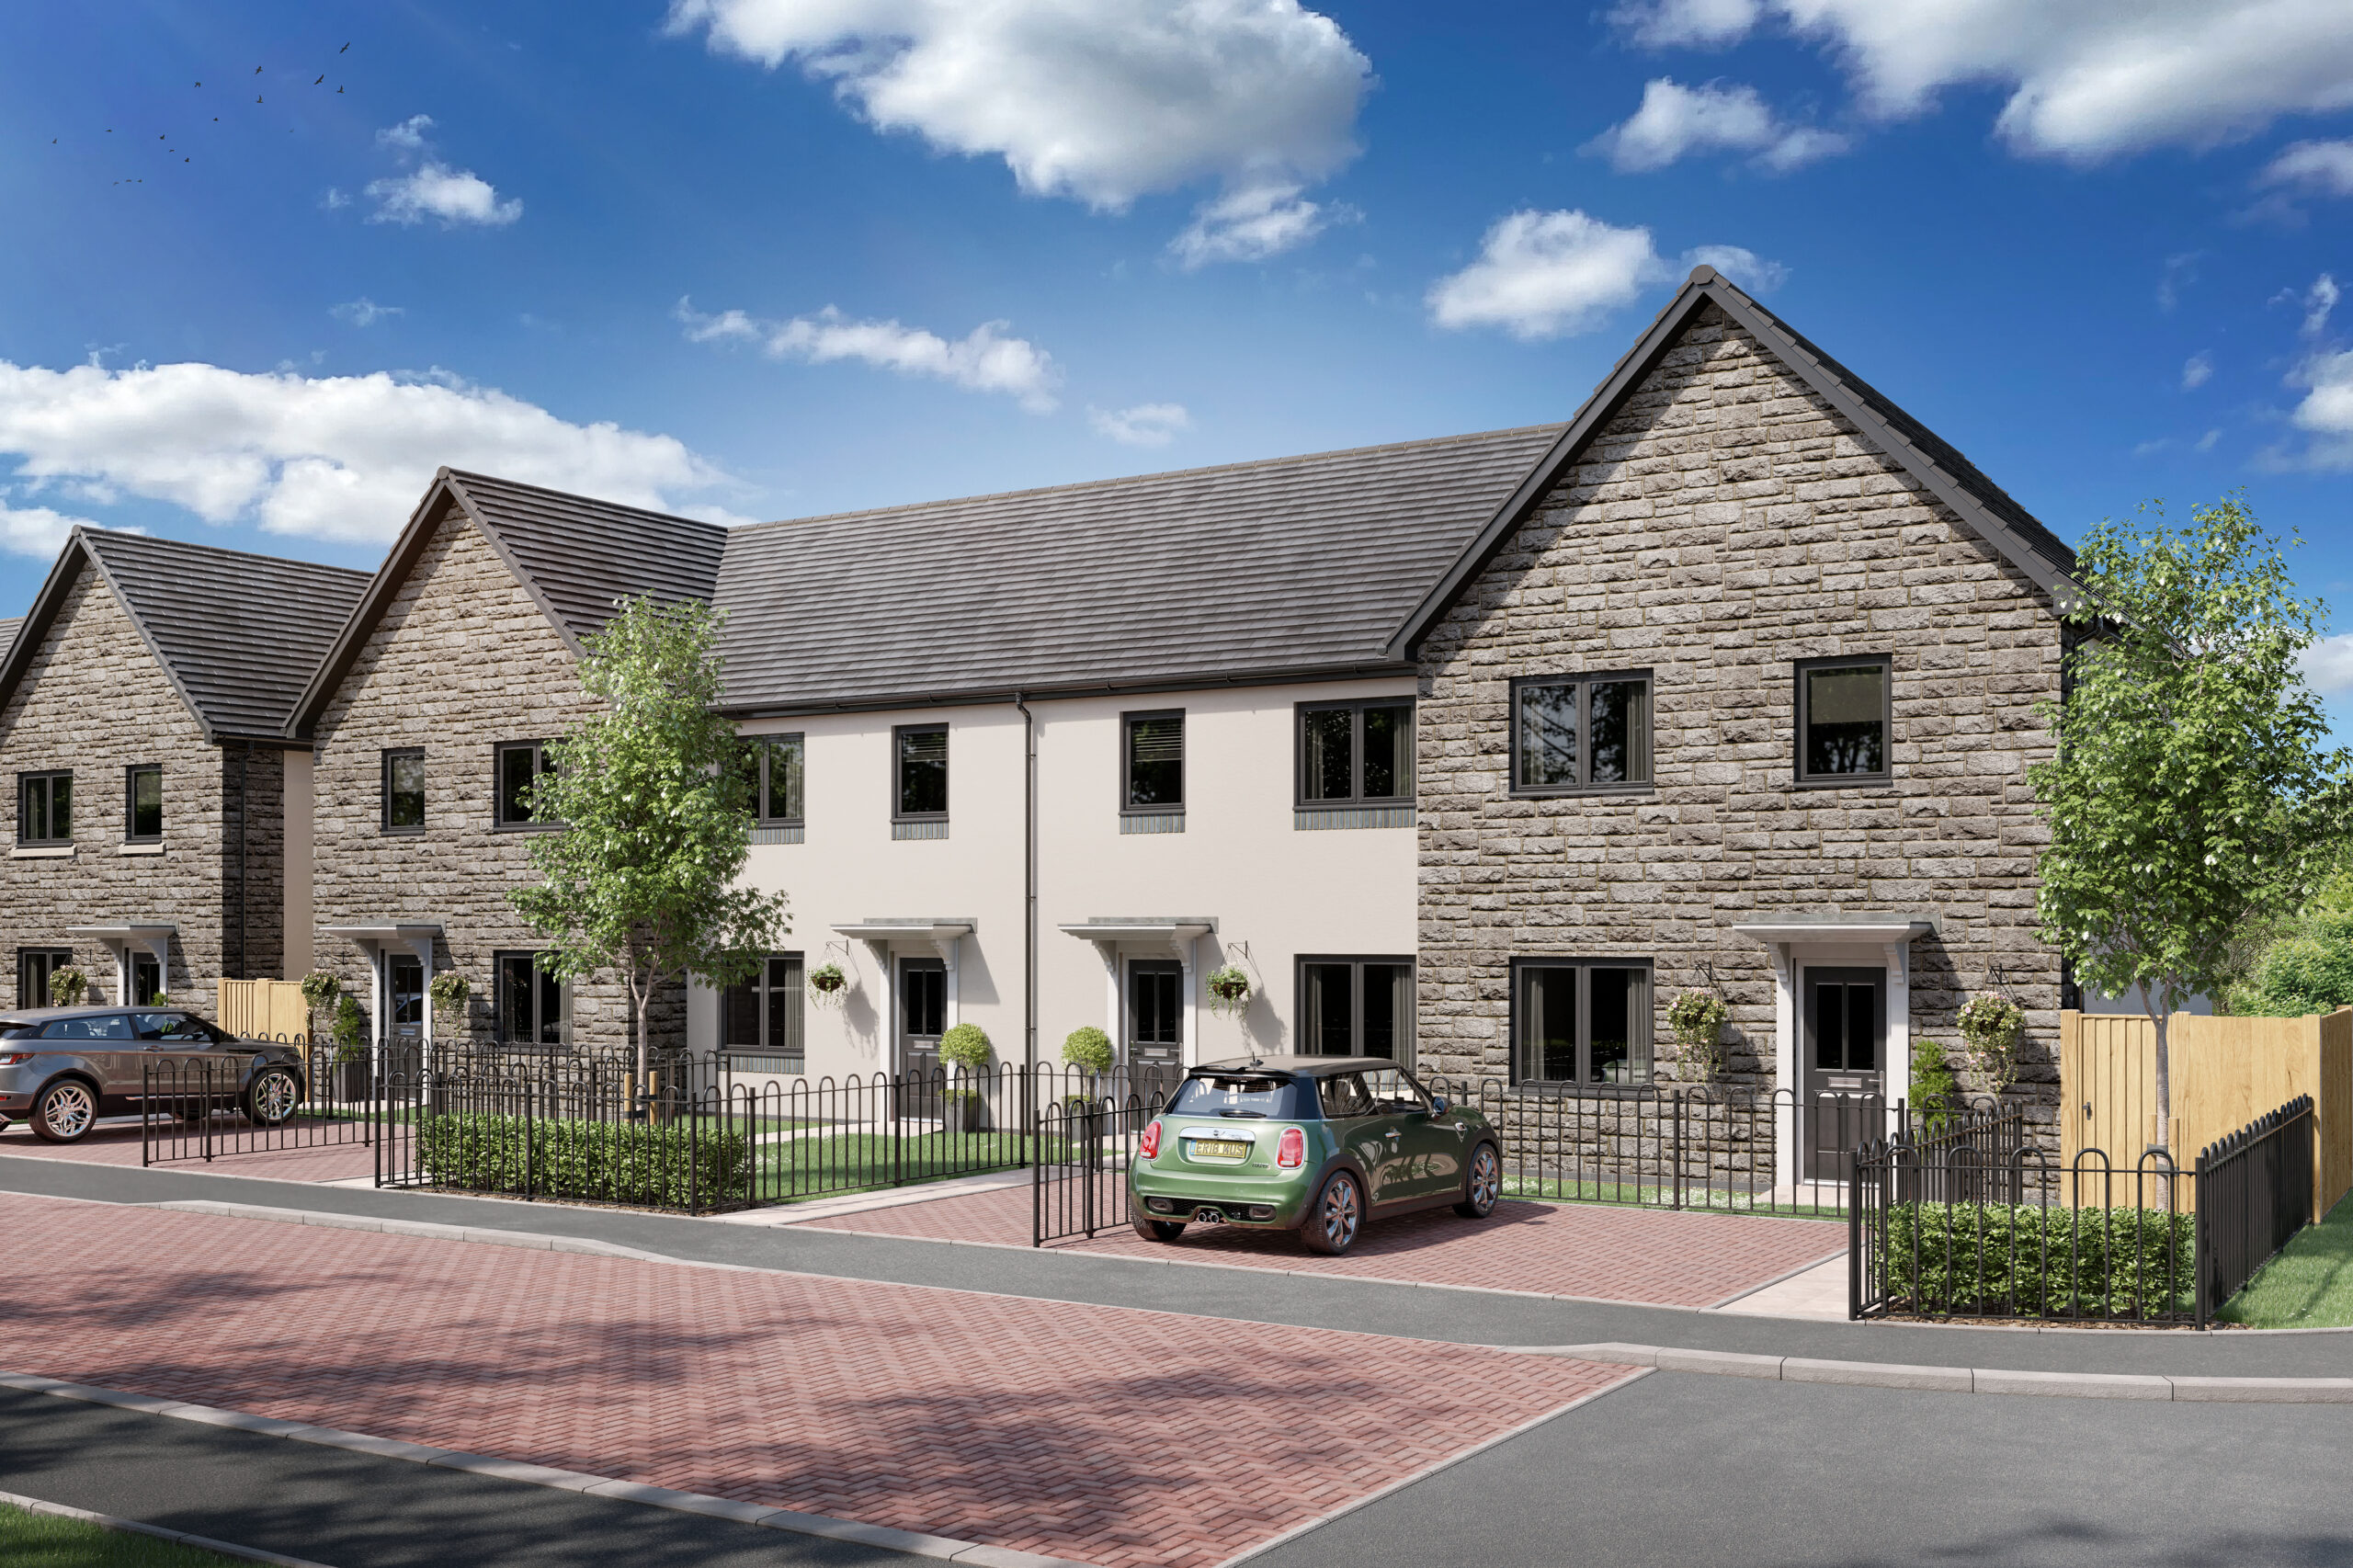 CGI image of a row of four homes, two with white render exterior walls and two with grey brick render and grey peak rooves and pink paved driveways